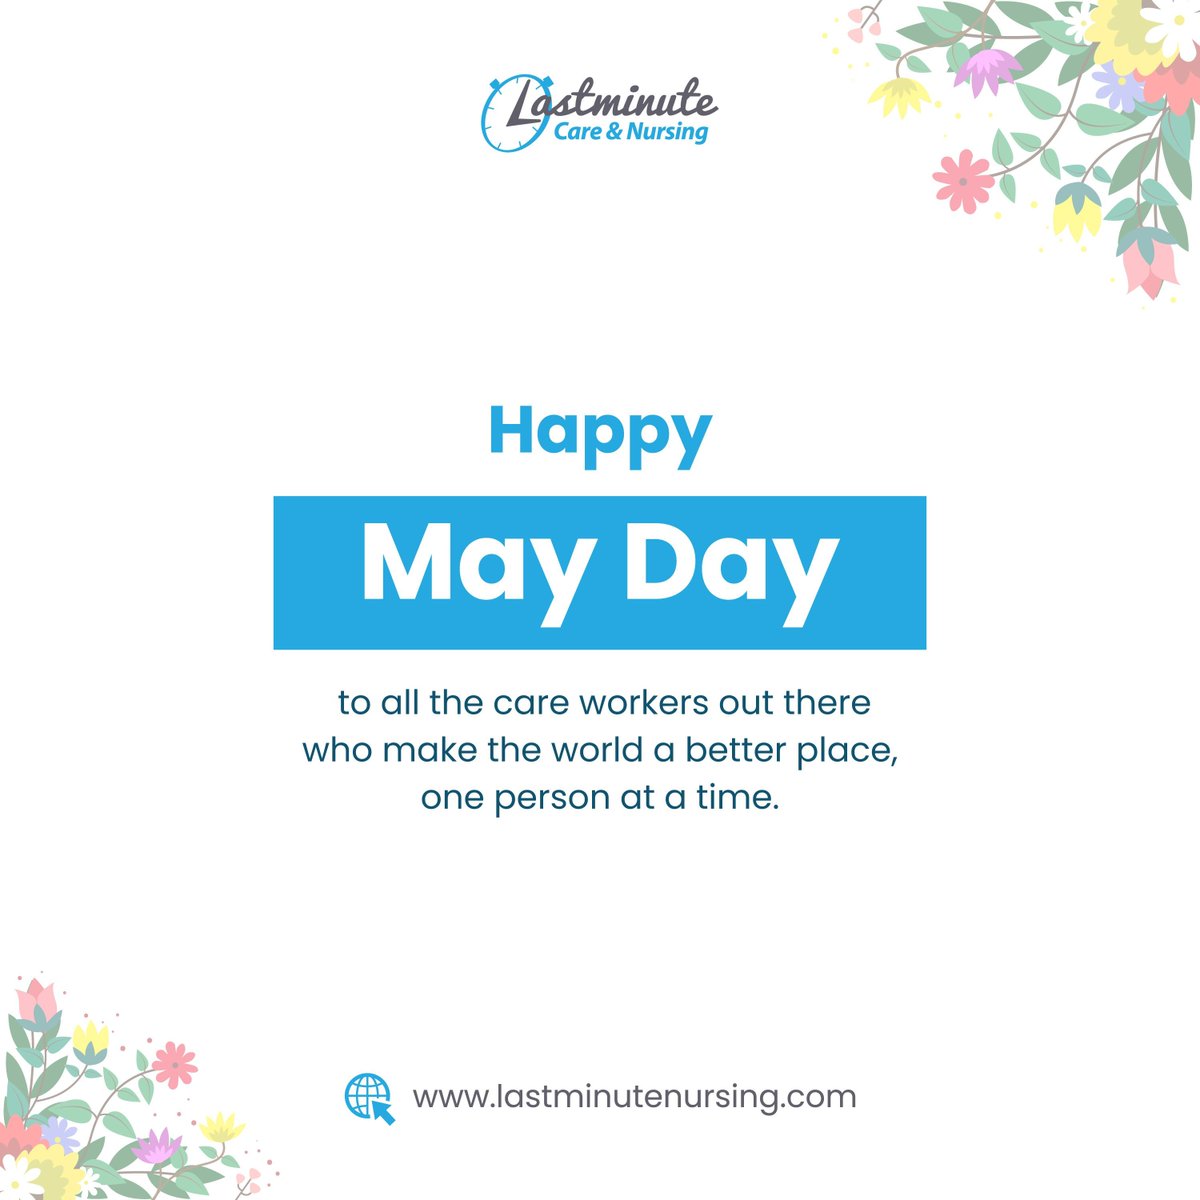 Happy May Day from Lastminute Care & Nursing.

#mayday #maydayuk #happymayday #lastminutenursing #careagency #careworker #supportworker #careassistant #carer #dementiacare #domiciliarycare #carejob